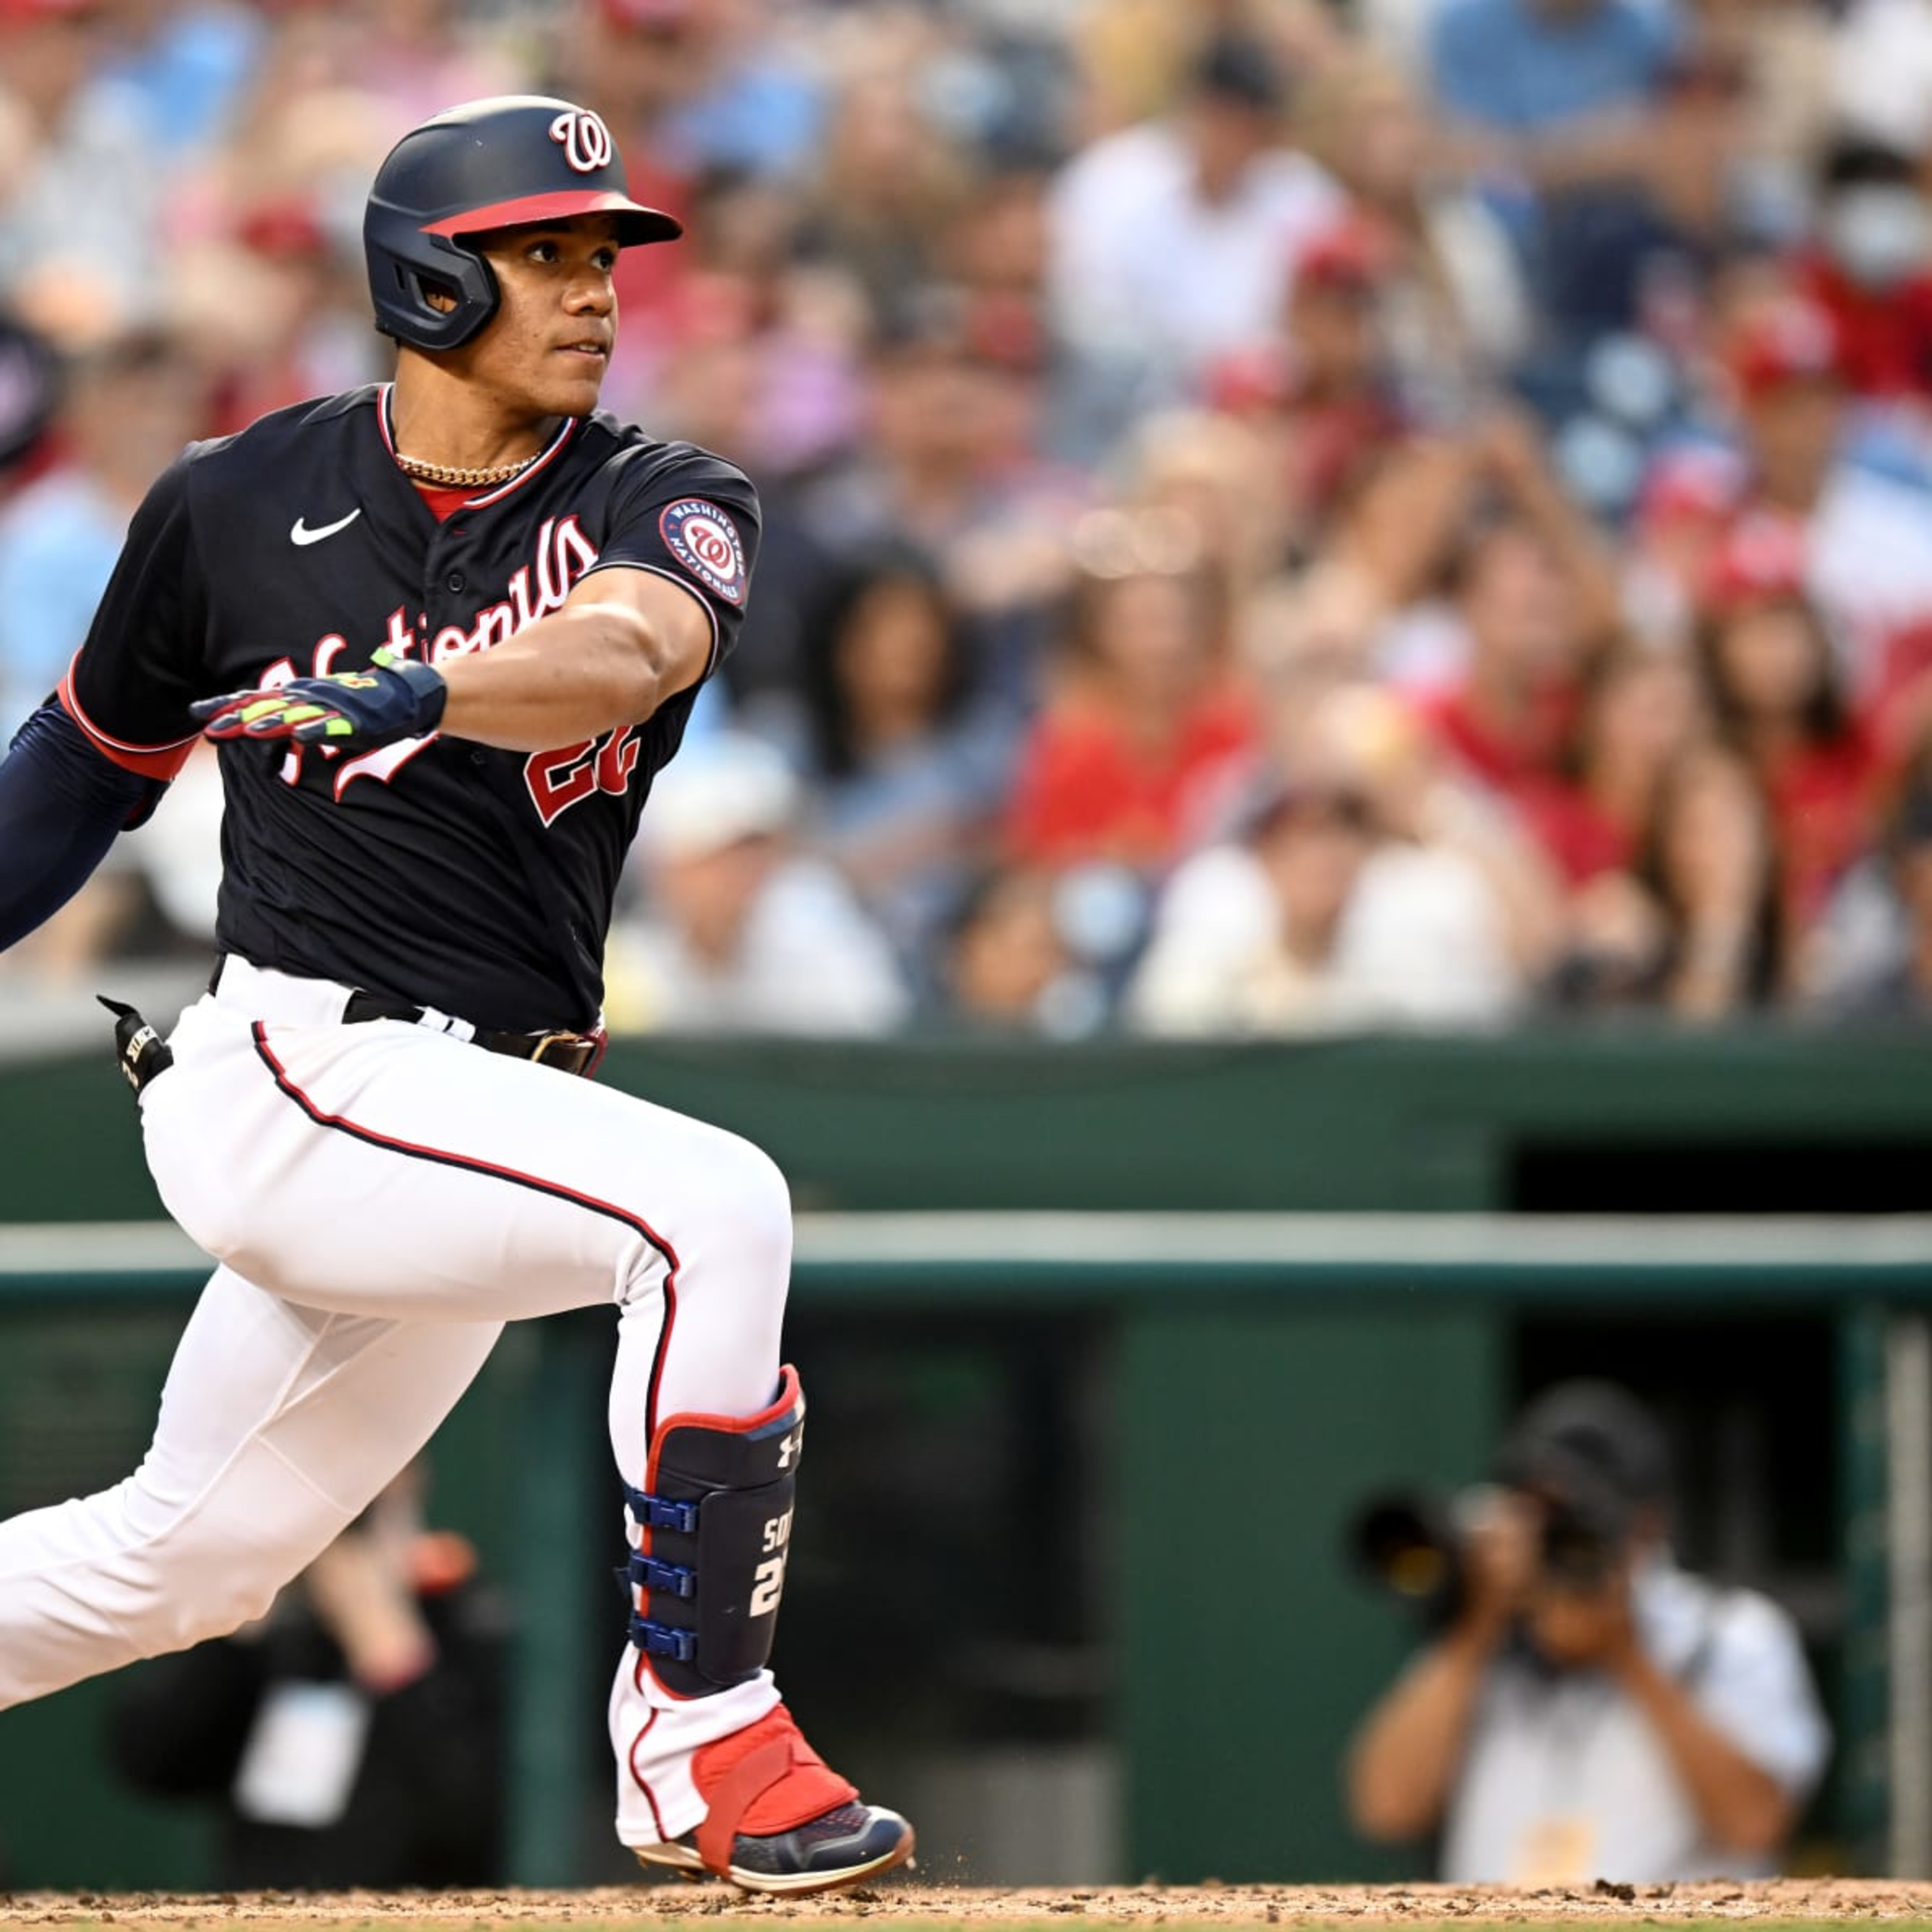 Juan Soto Trade Rumors: Padres' C.J. Abrams, Top Prospects Available in Talks